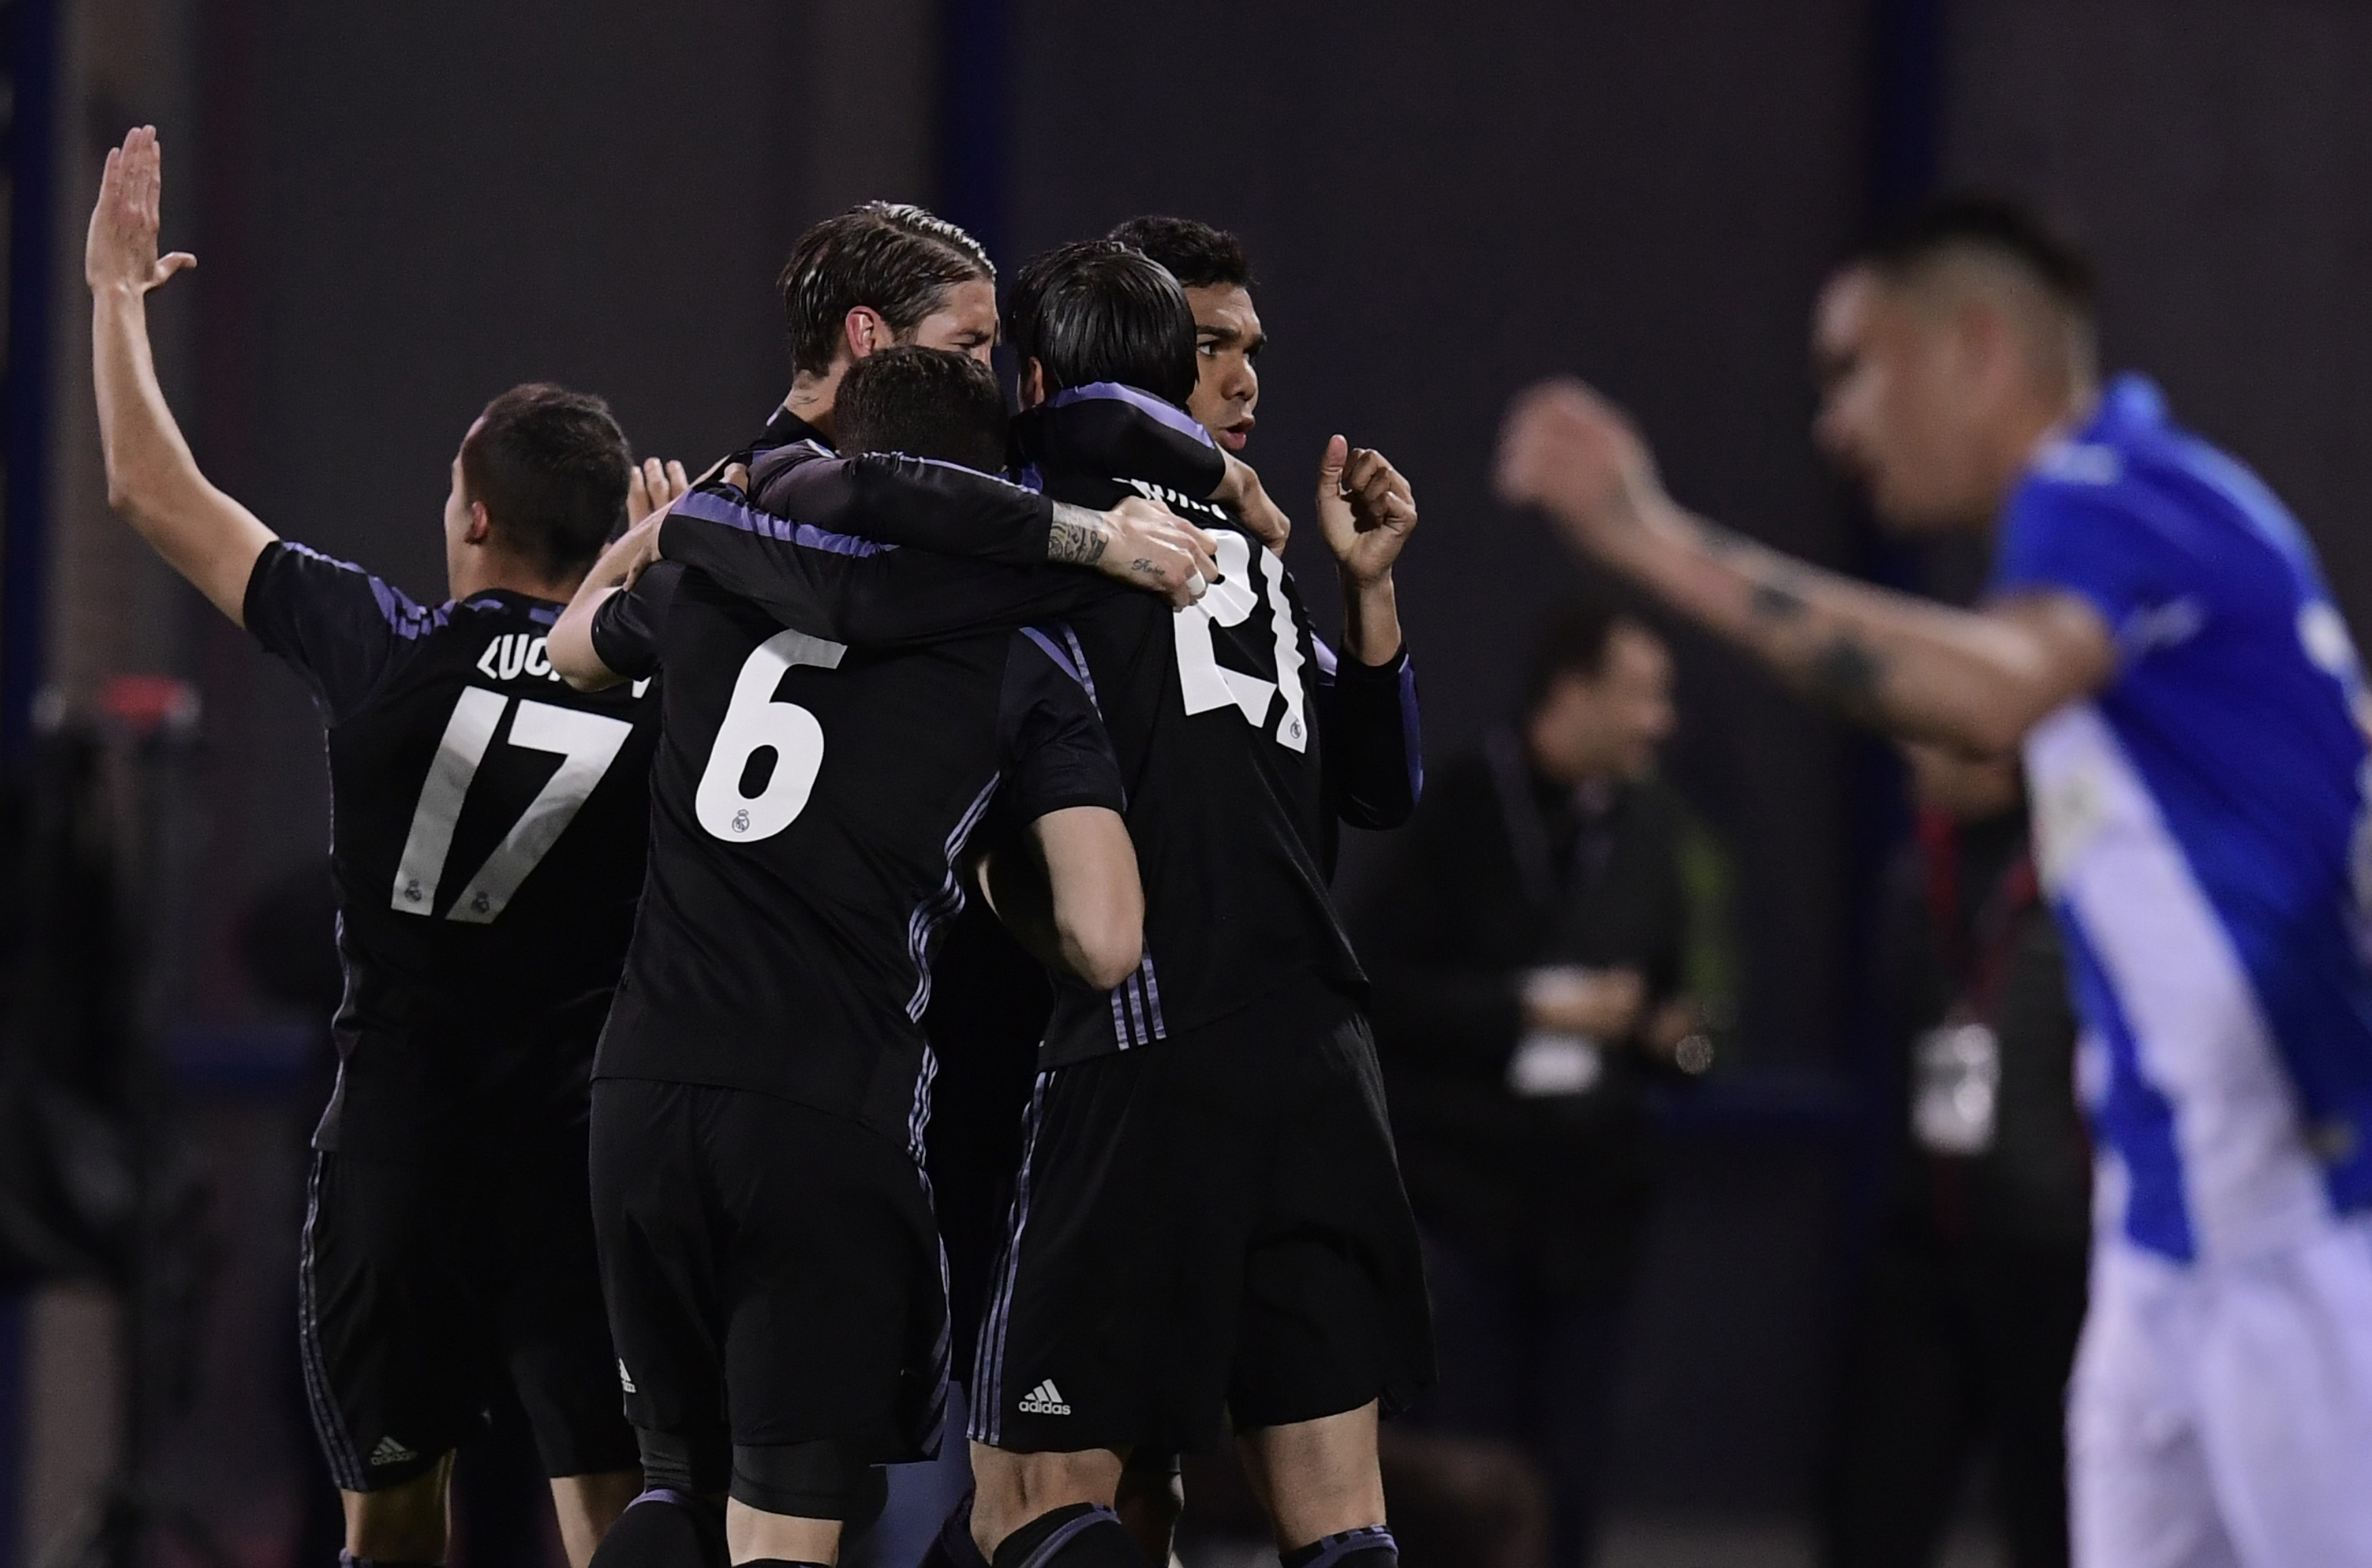 Real Madrid players celebrate after scoring their fourth goal during the Spanish league football match Club Deportivo Leganes SAD vs Real Madrid CF at the Estadio Municipal Butarque in Leganes on the outskirts of Madrid on April 5, 2017. / AFP PHOTO / JAVIER SORIANO        (Photo credit should read JAVIER SORIANO/AFP/Getty Images)